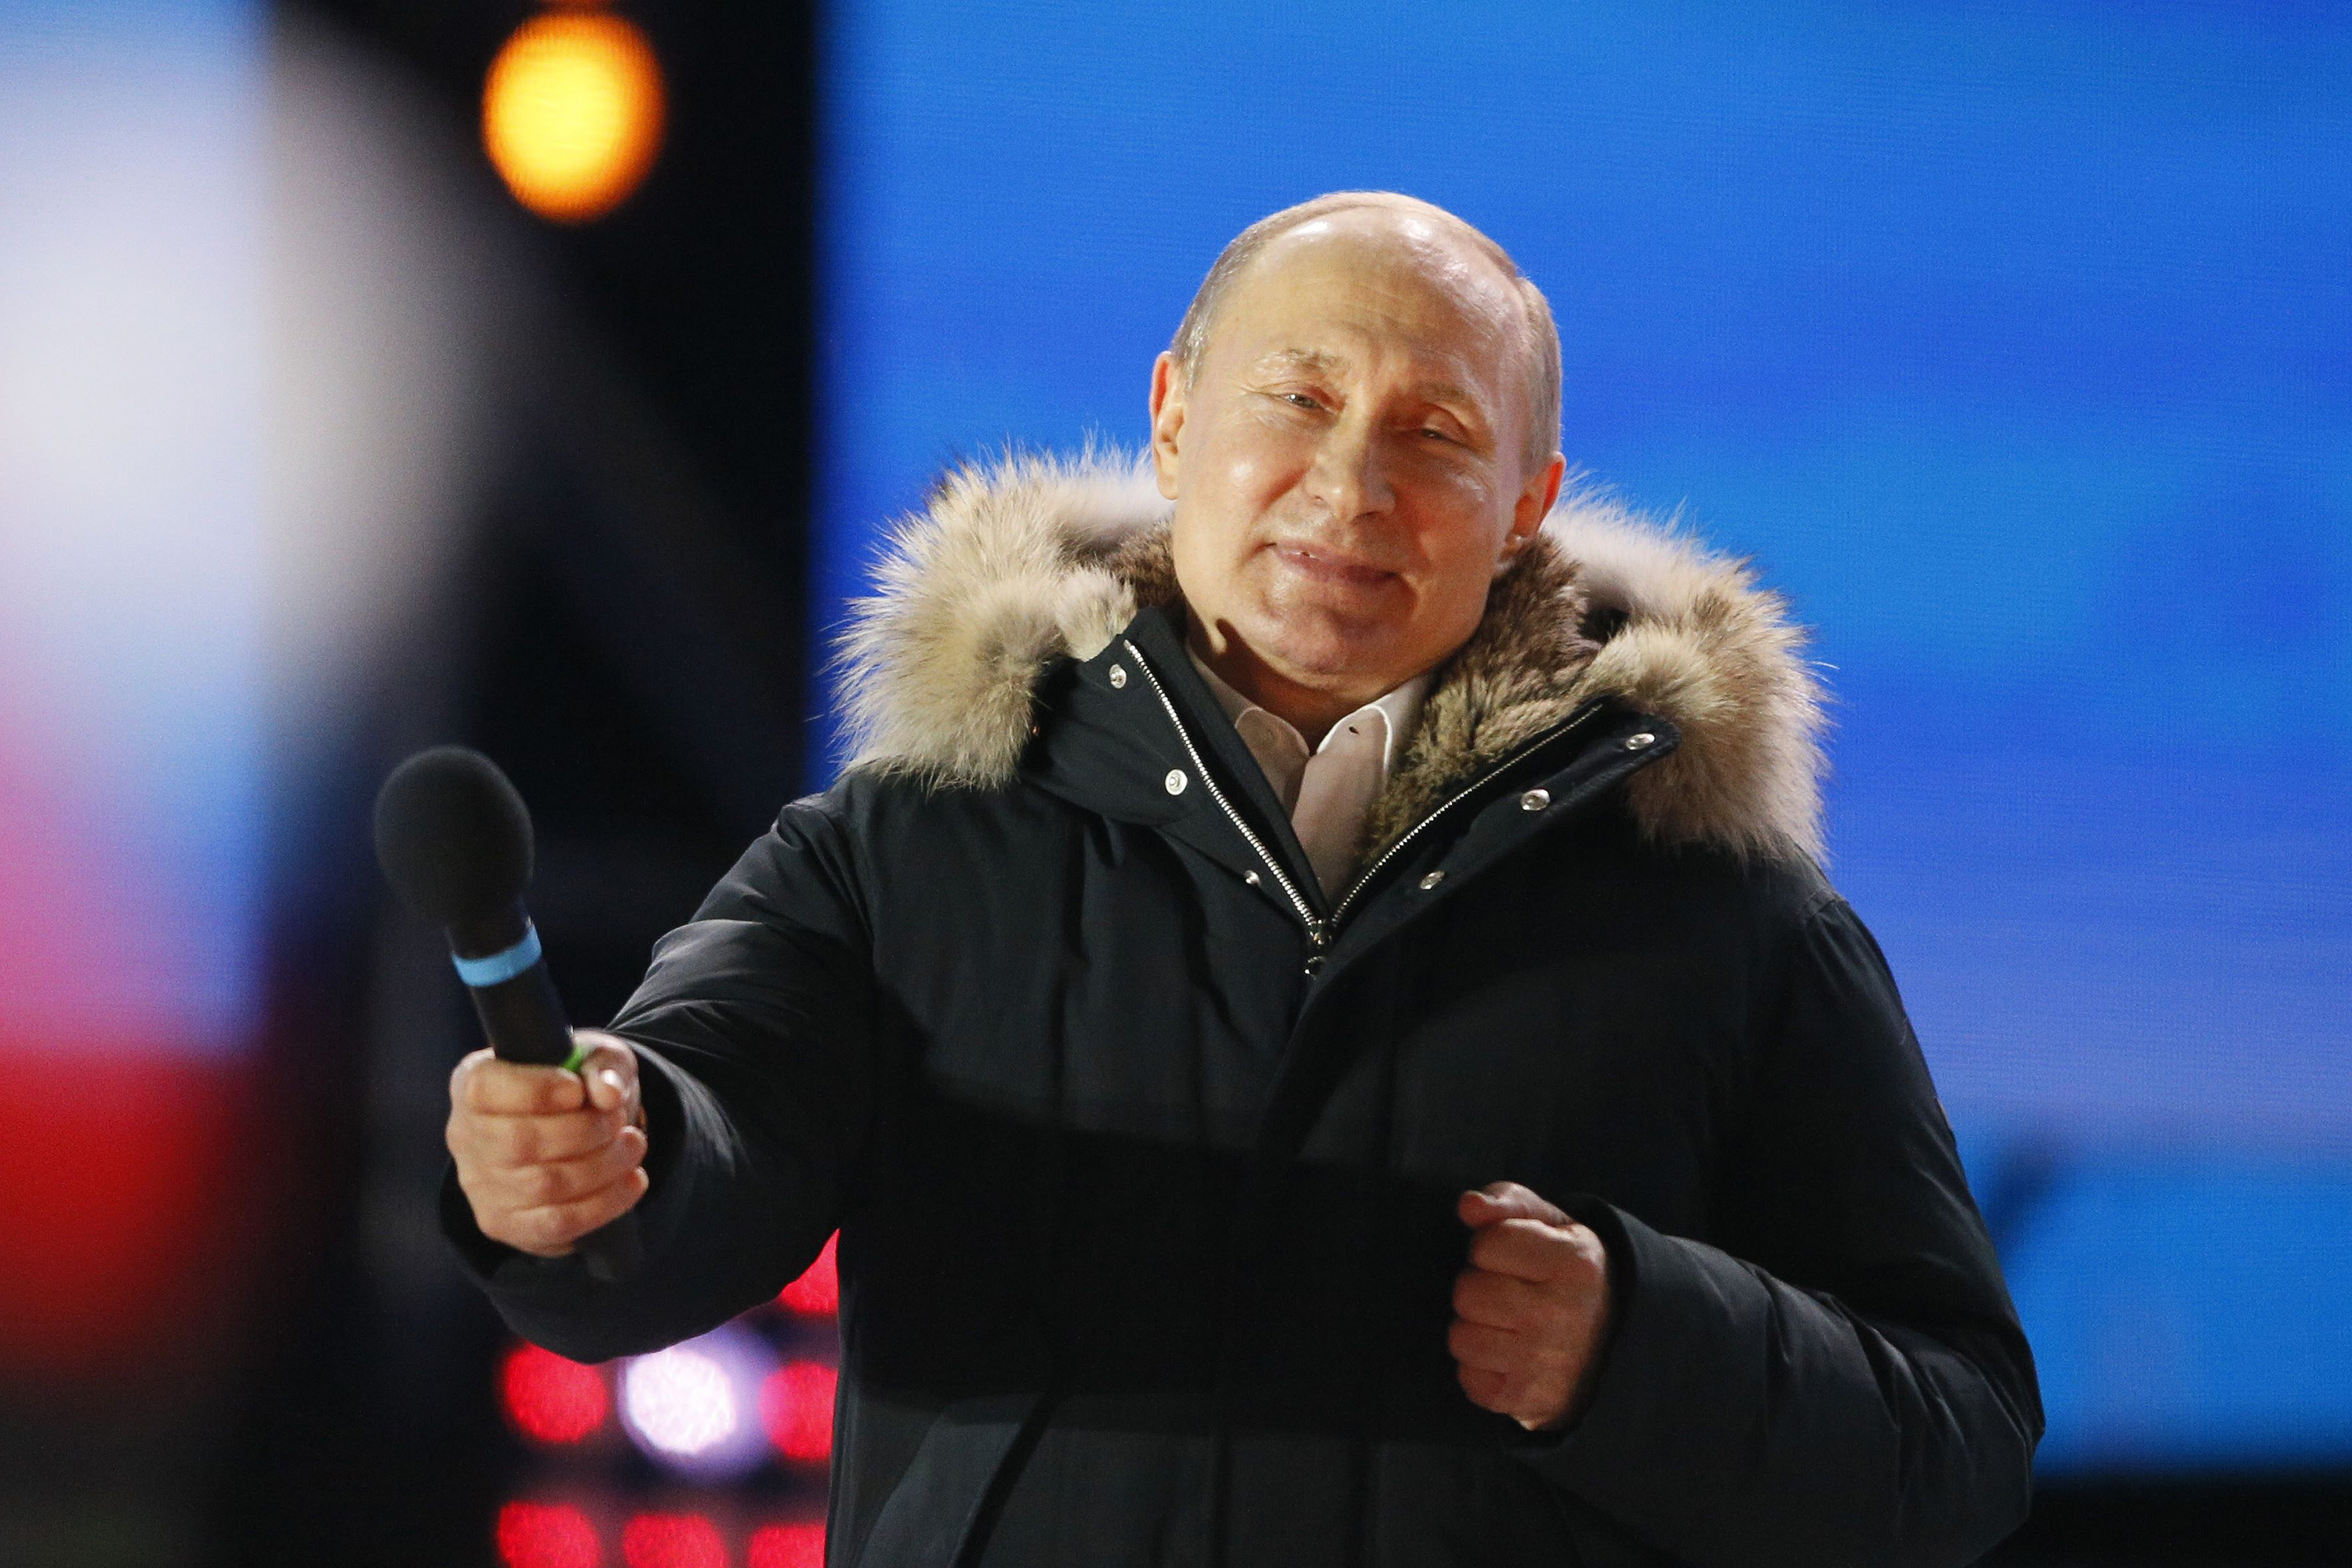 Russian President and Presidential candidate Vladimir Putin attends a rally and concert marking the fourth anniversary of Russia's annexation of the Crimea region, at Manezhnaya Square in central Moscow, Russia March 18, 2018. REUTERS/